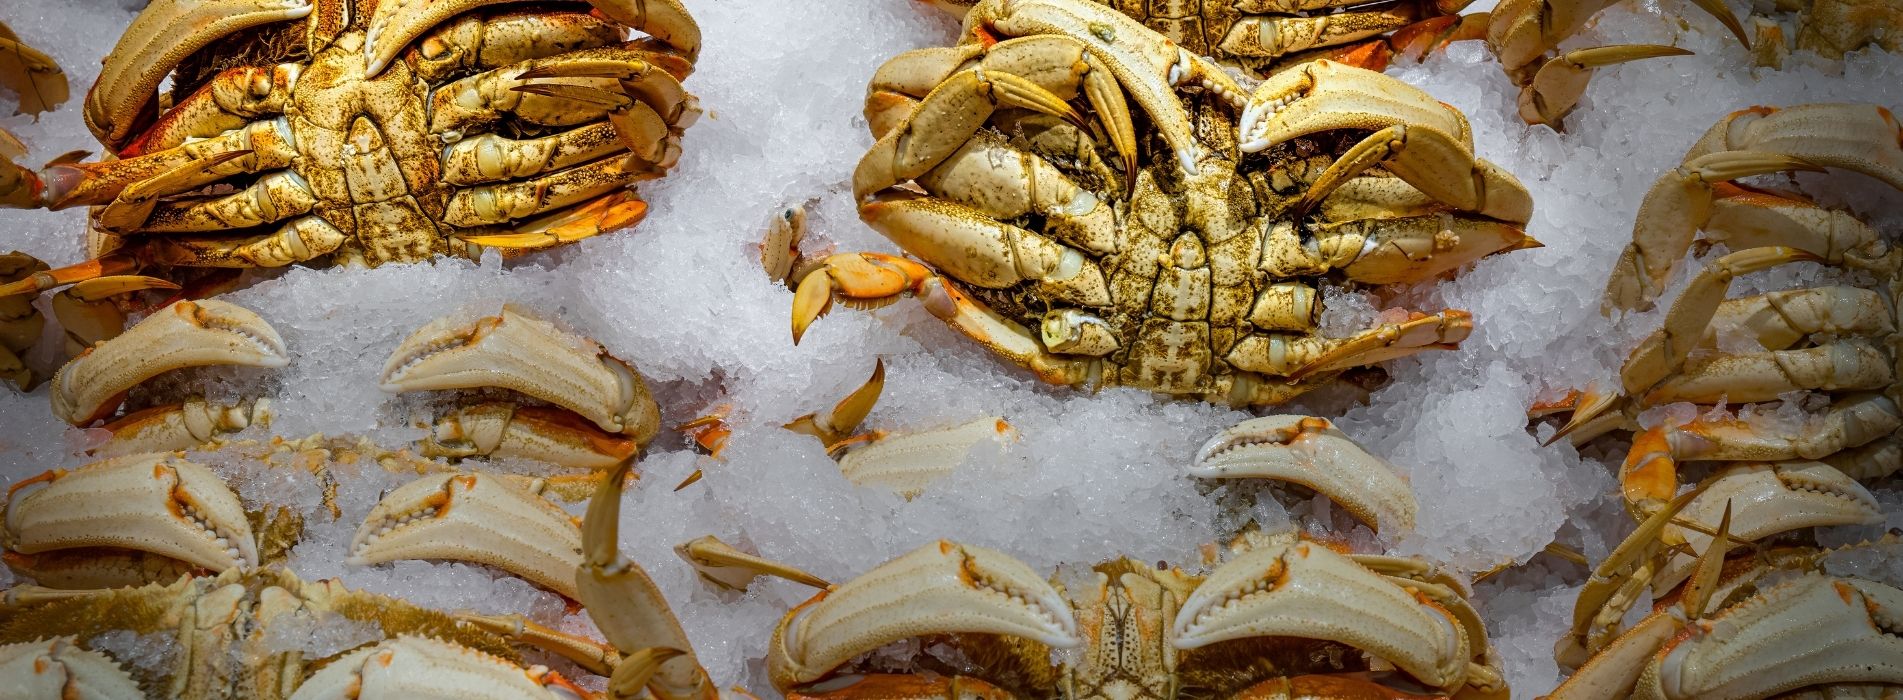 How To Safely Thaw and Prepare Frozen Crab